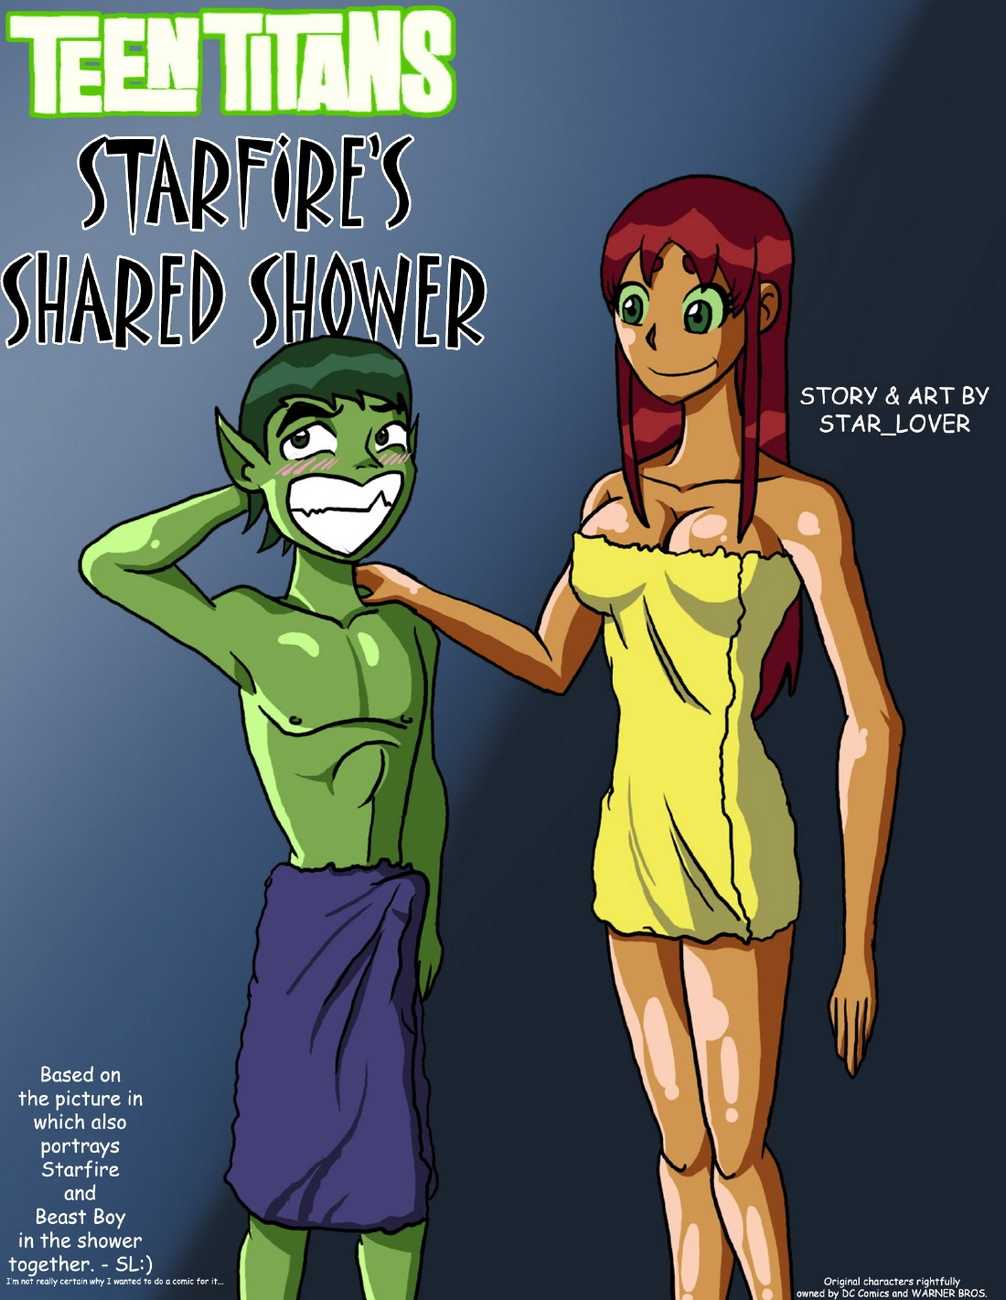 Starfire's Shared Shower page 1